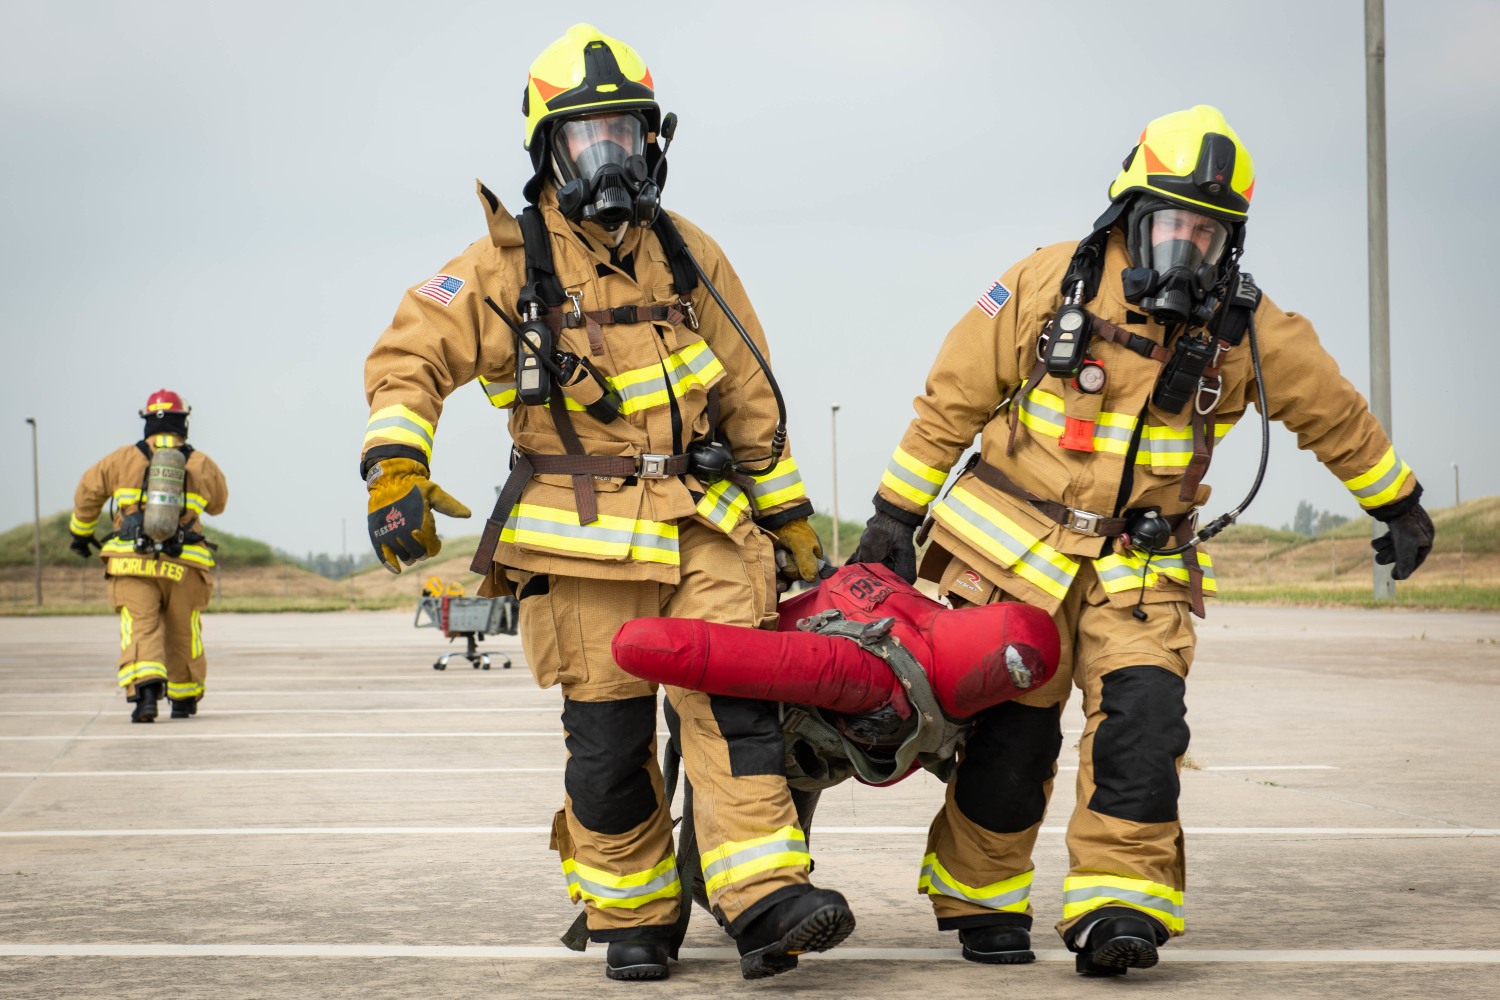 Incirlik Air Base Fire Department members respond to a simulated aircraft incident during a Major Accident Response Exercise at Incirlik Air Base, to gain experience that will help them respond to military training deaths and accidents. 